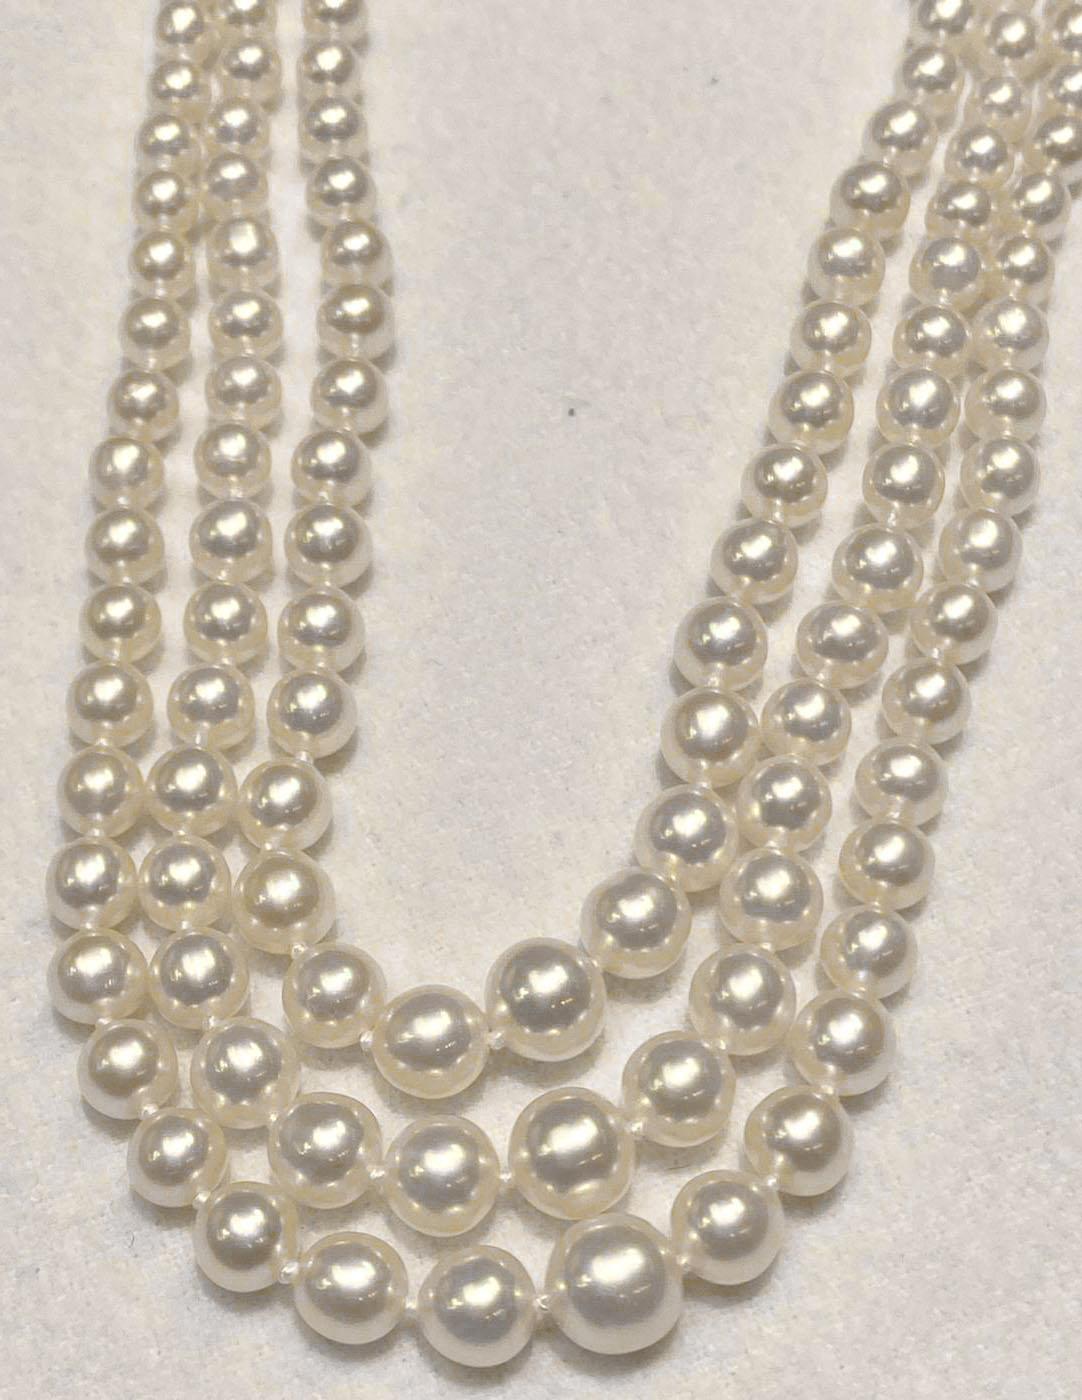 Graduating akoya pearls with a 14k yellow clasp 4-7.5mm 16-18inches #IP25
